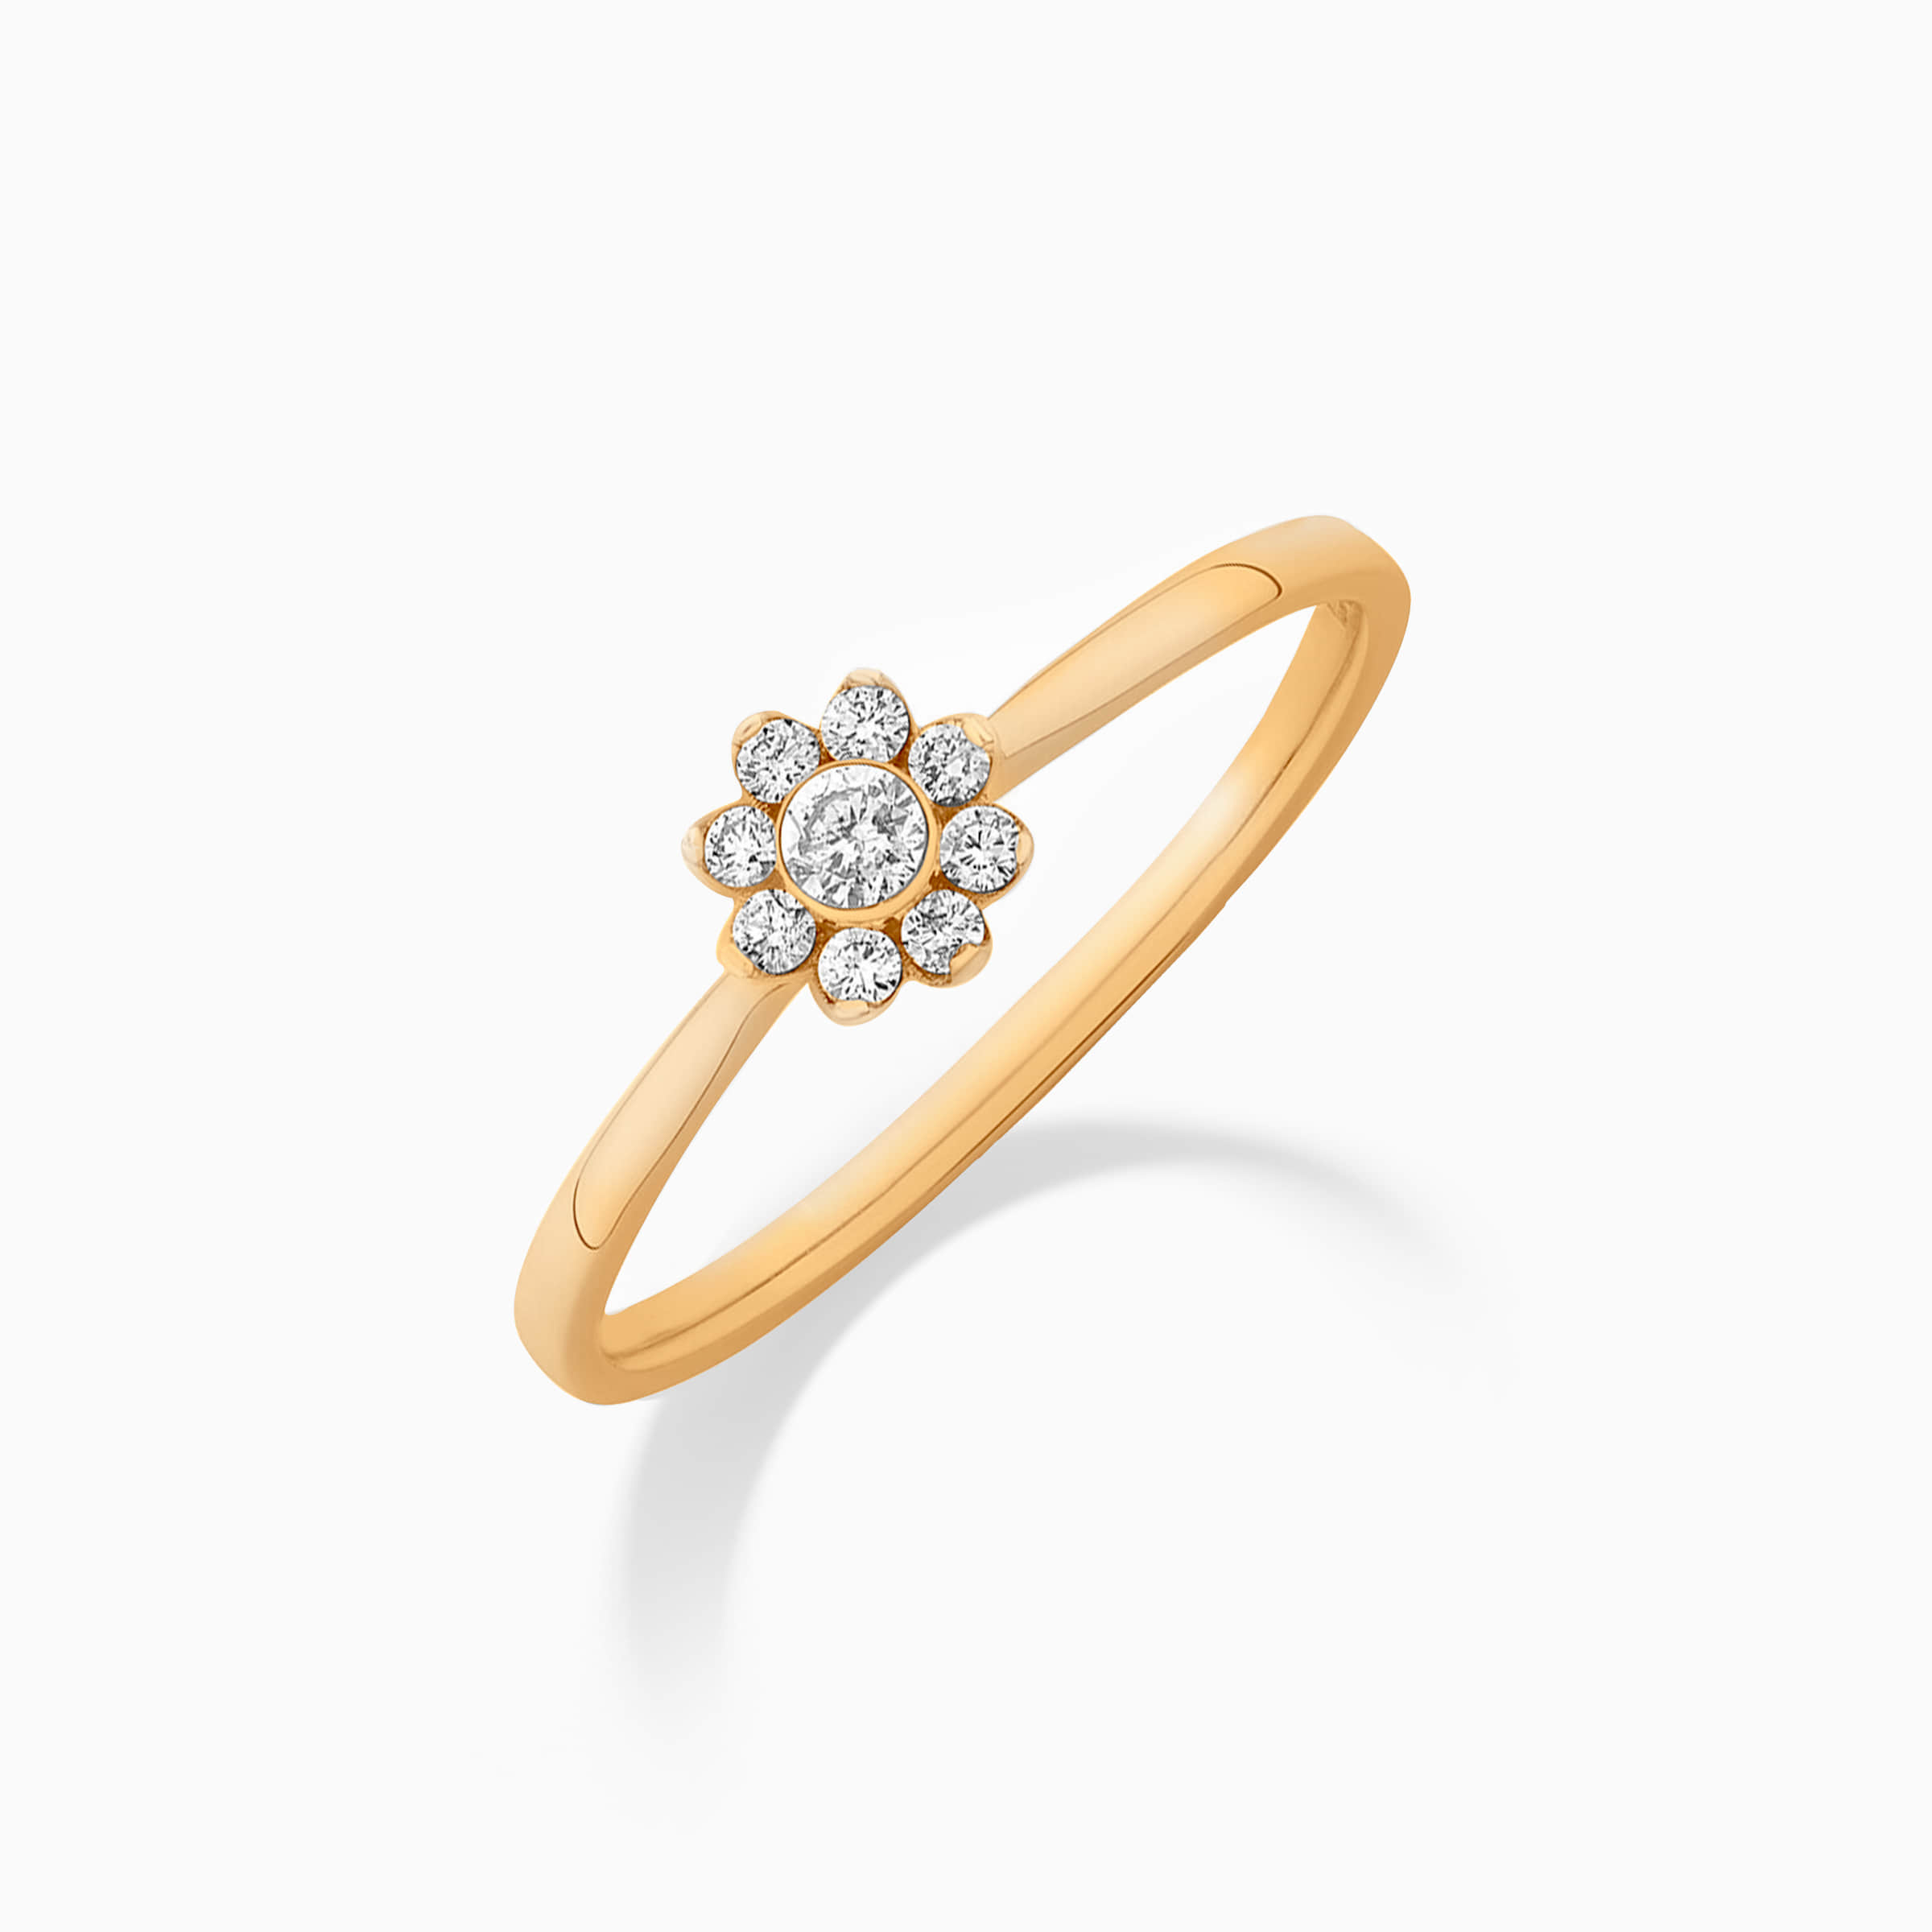 Darry Ring floral halo promise ring in yellow gold